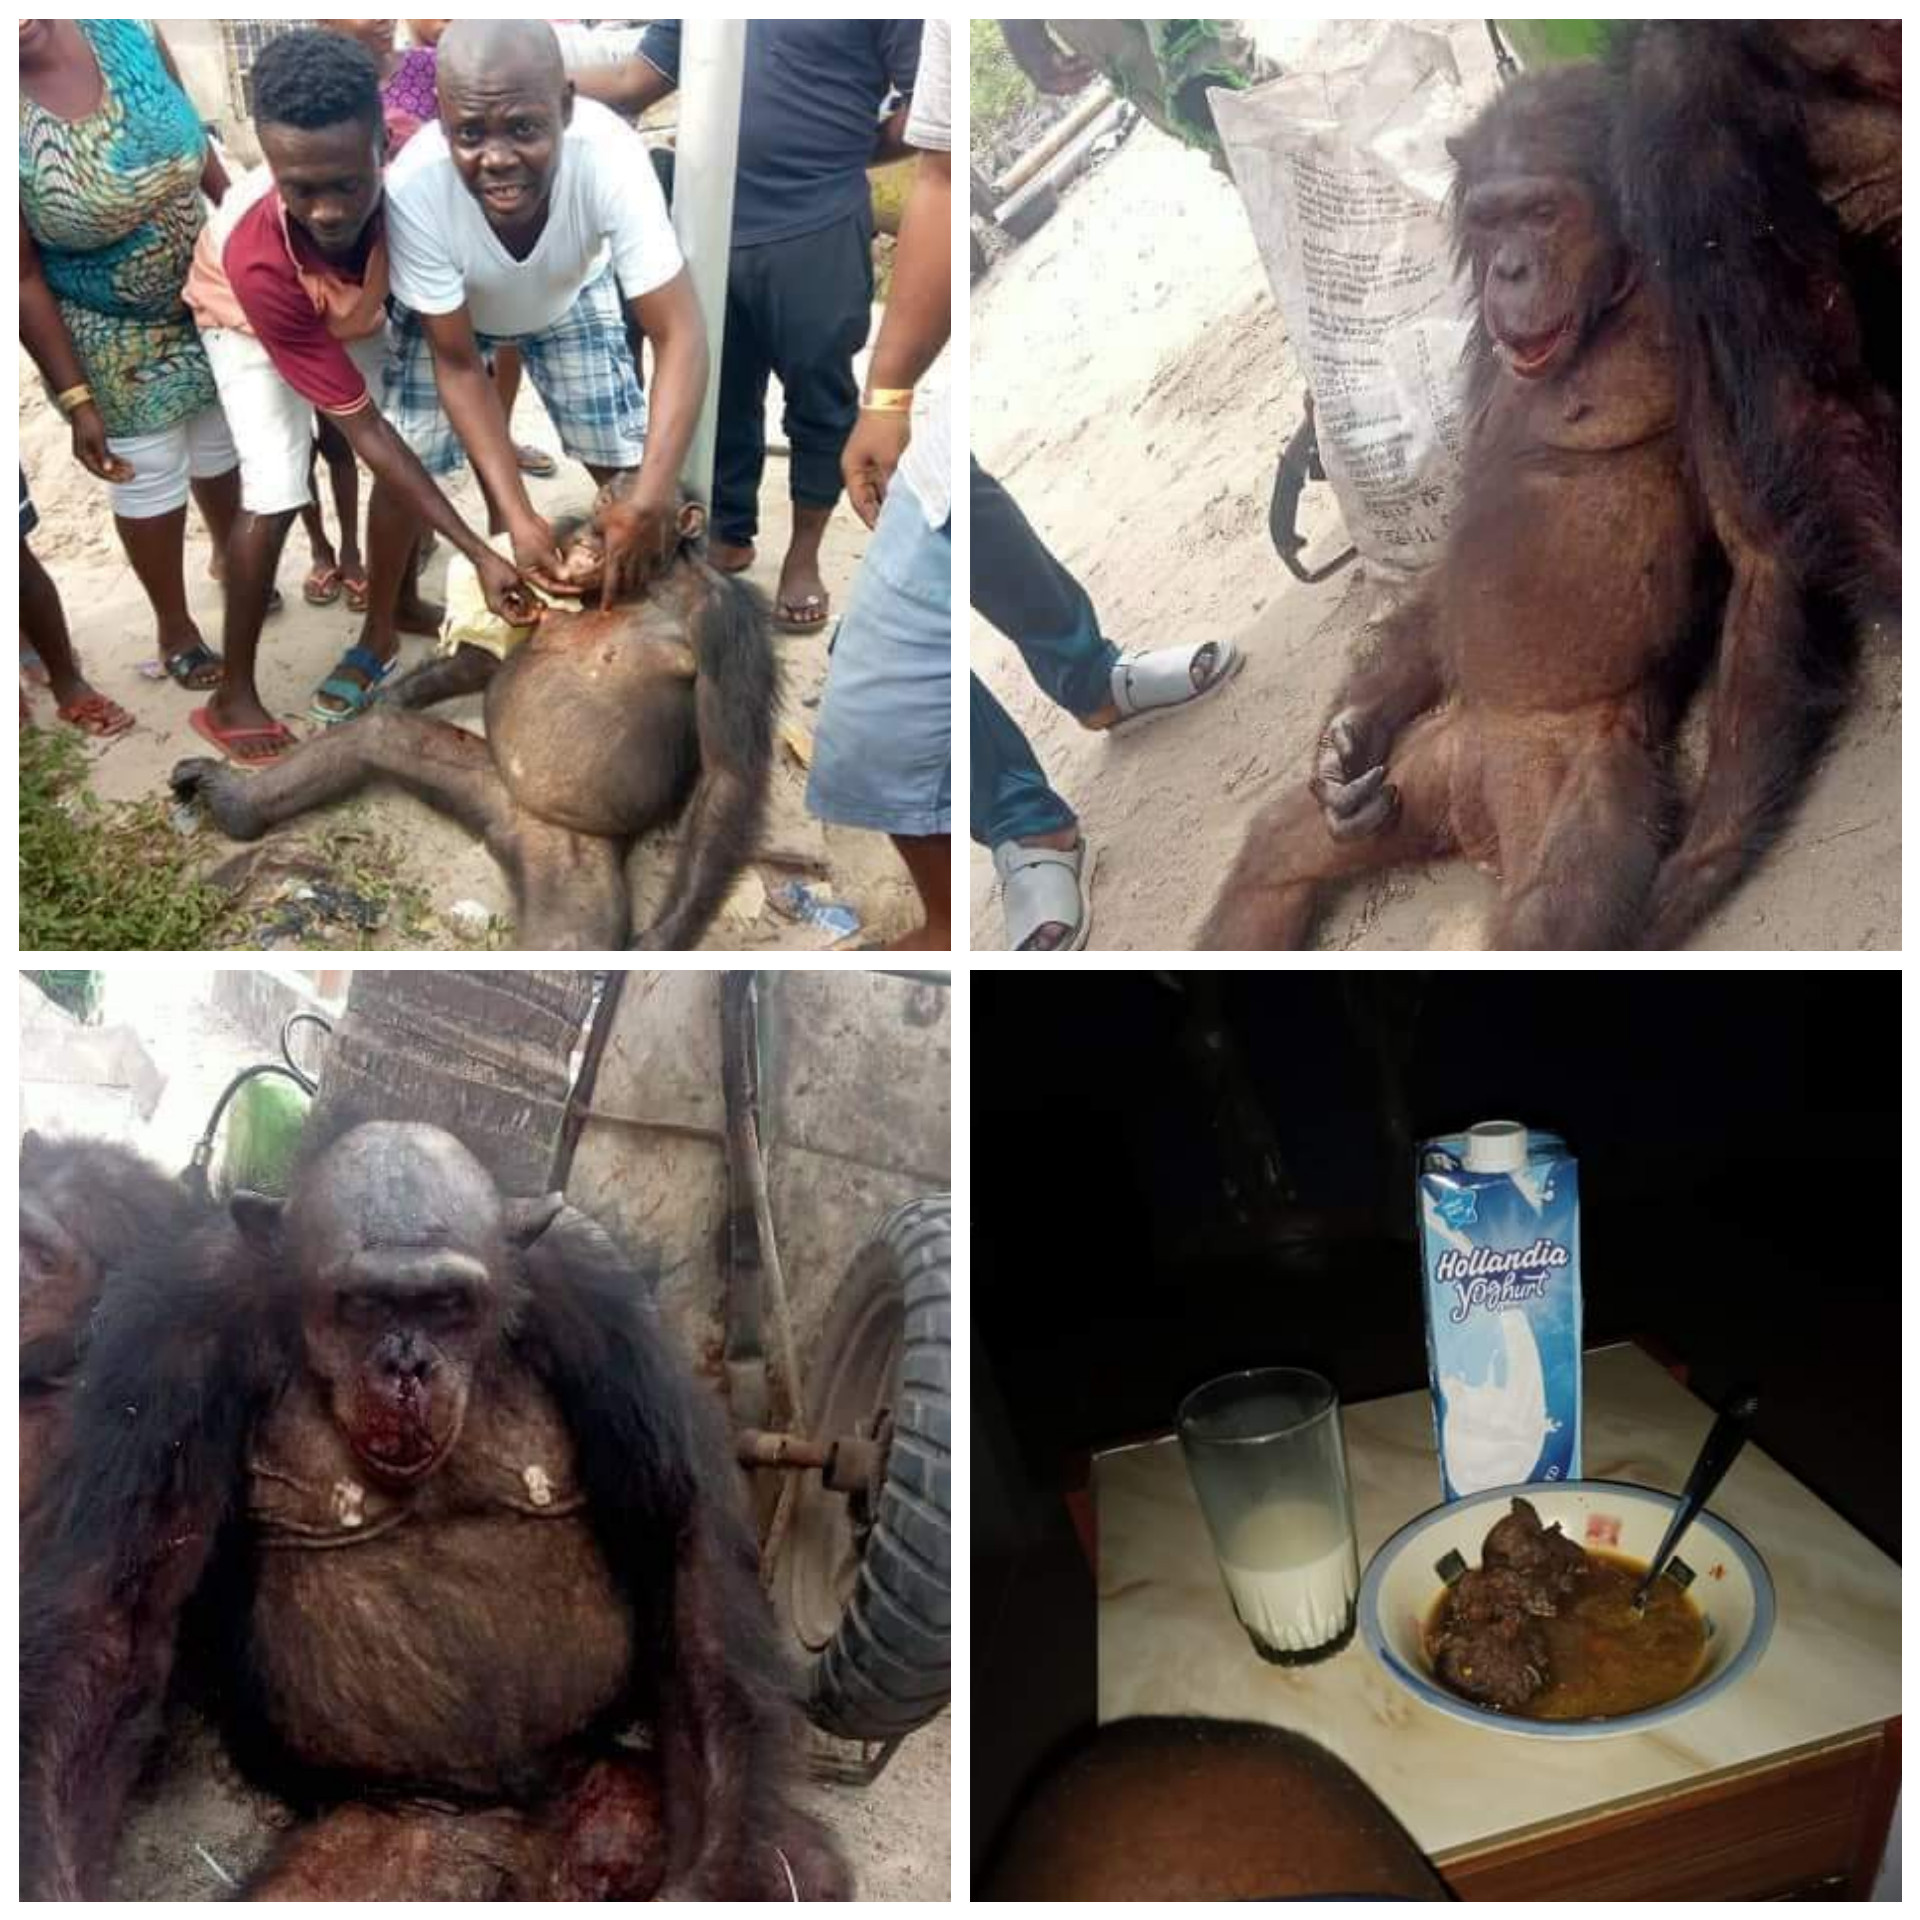 “Eating endangered species into extinction” – Reactions as hunters, locals kill chimpanzee and use meat to make pepper soup in Bayelsa community